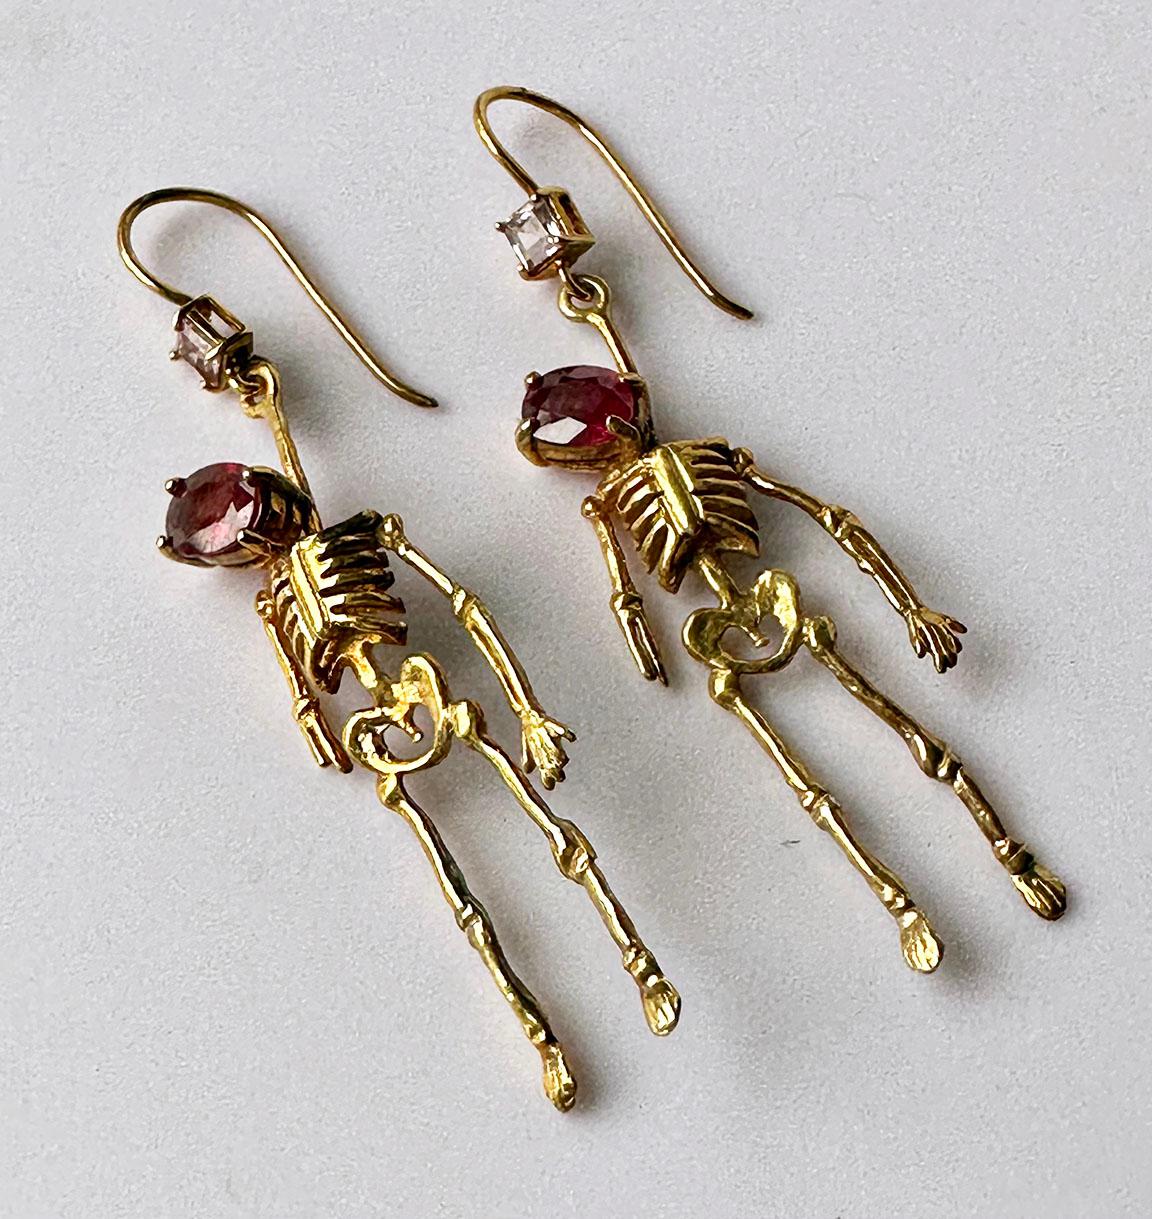 Silver Skeleton Earrings set with Ruby and Tourmaline For Sale 3